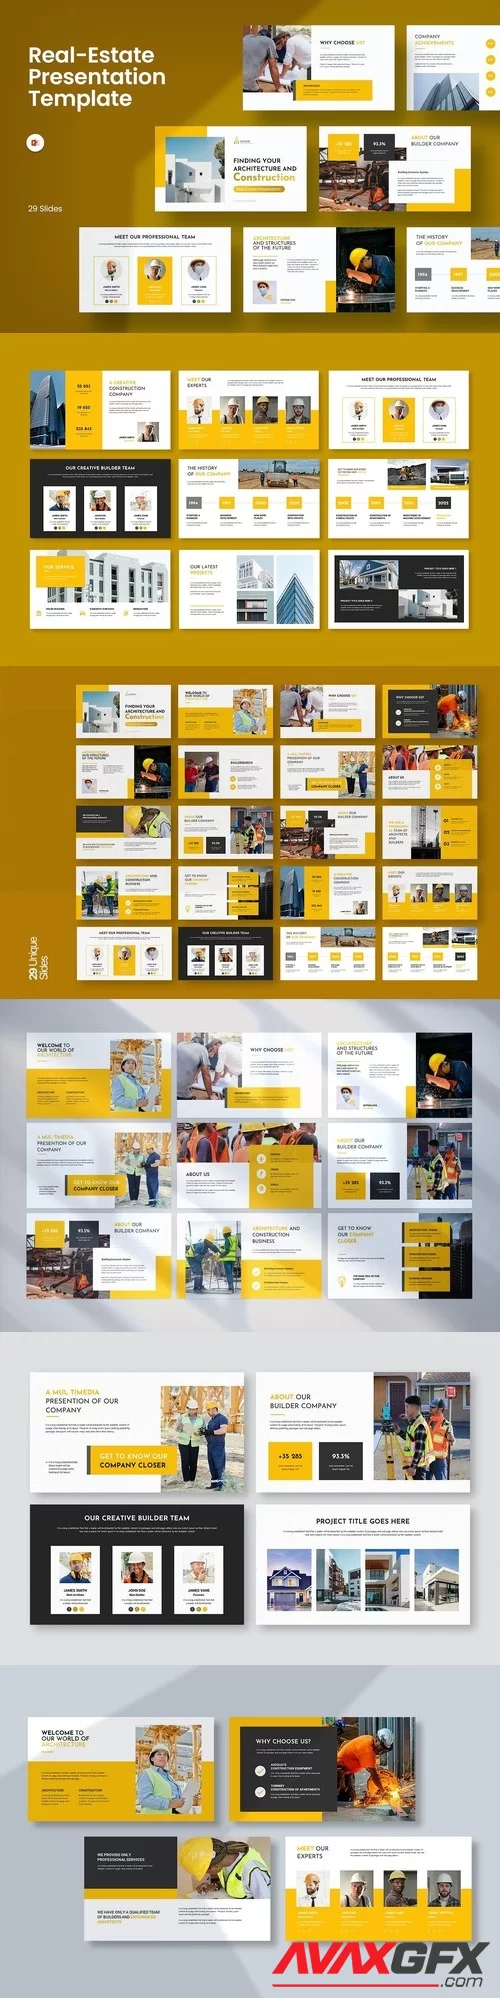 Real-Estate PowerPoint Presentation Template MAG4YWY [PPTX]